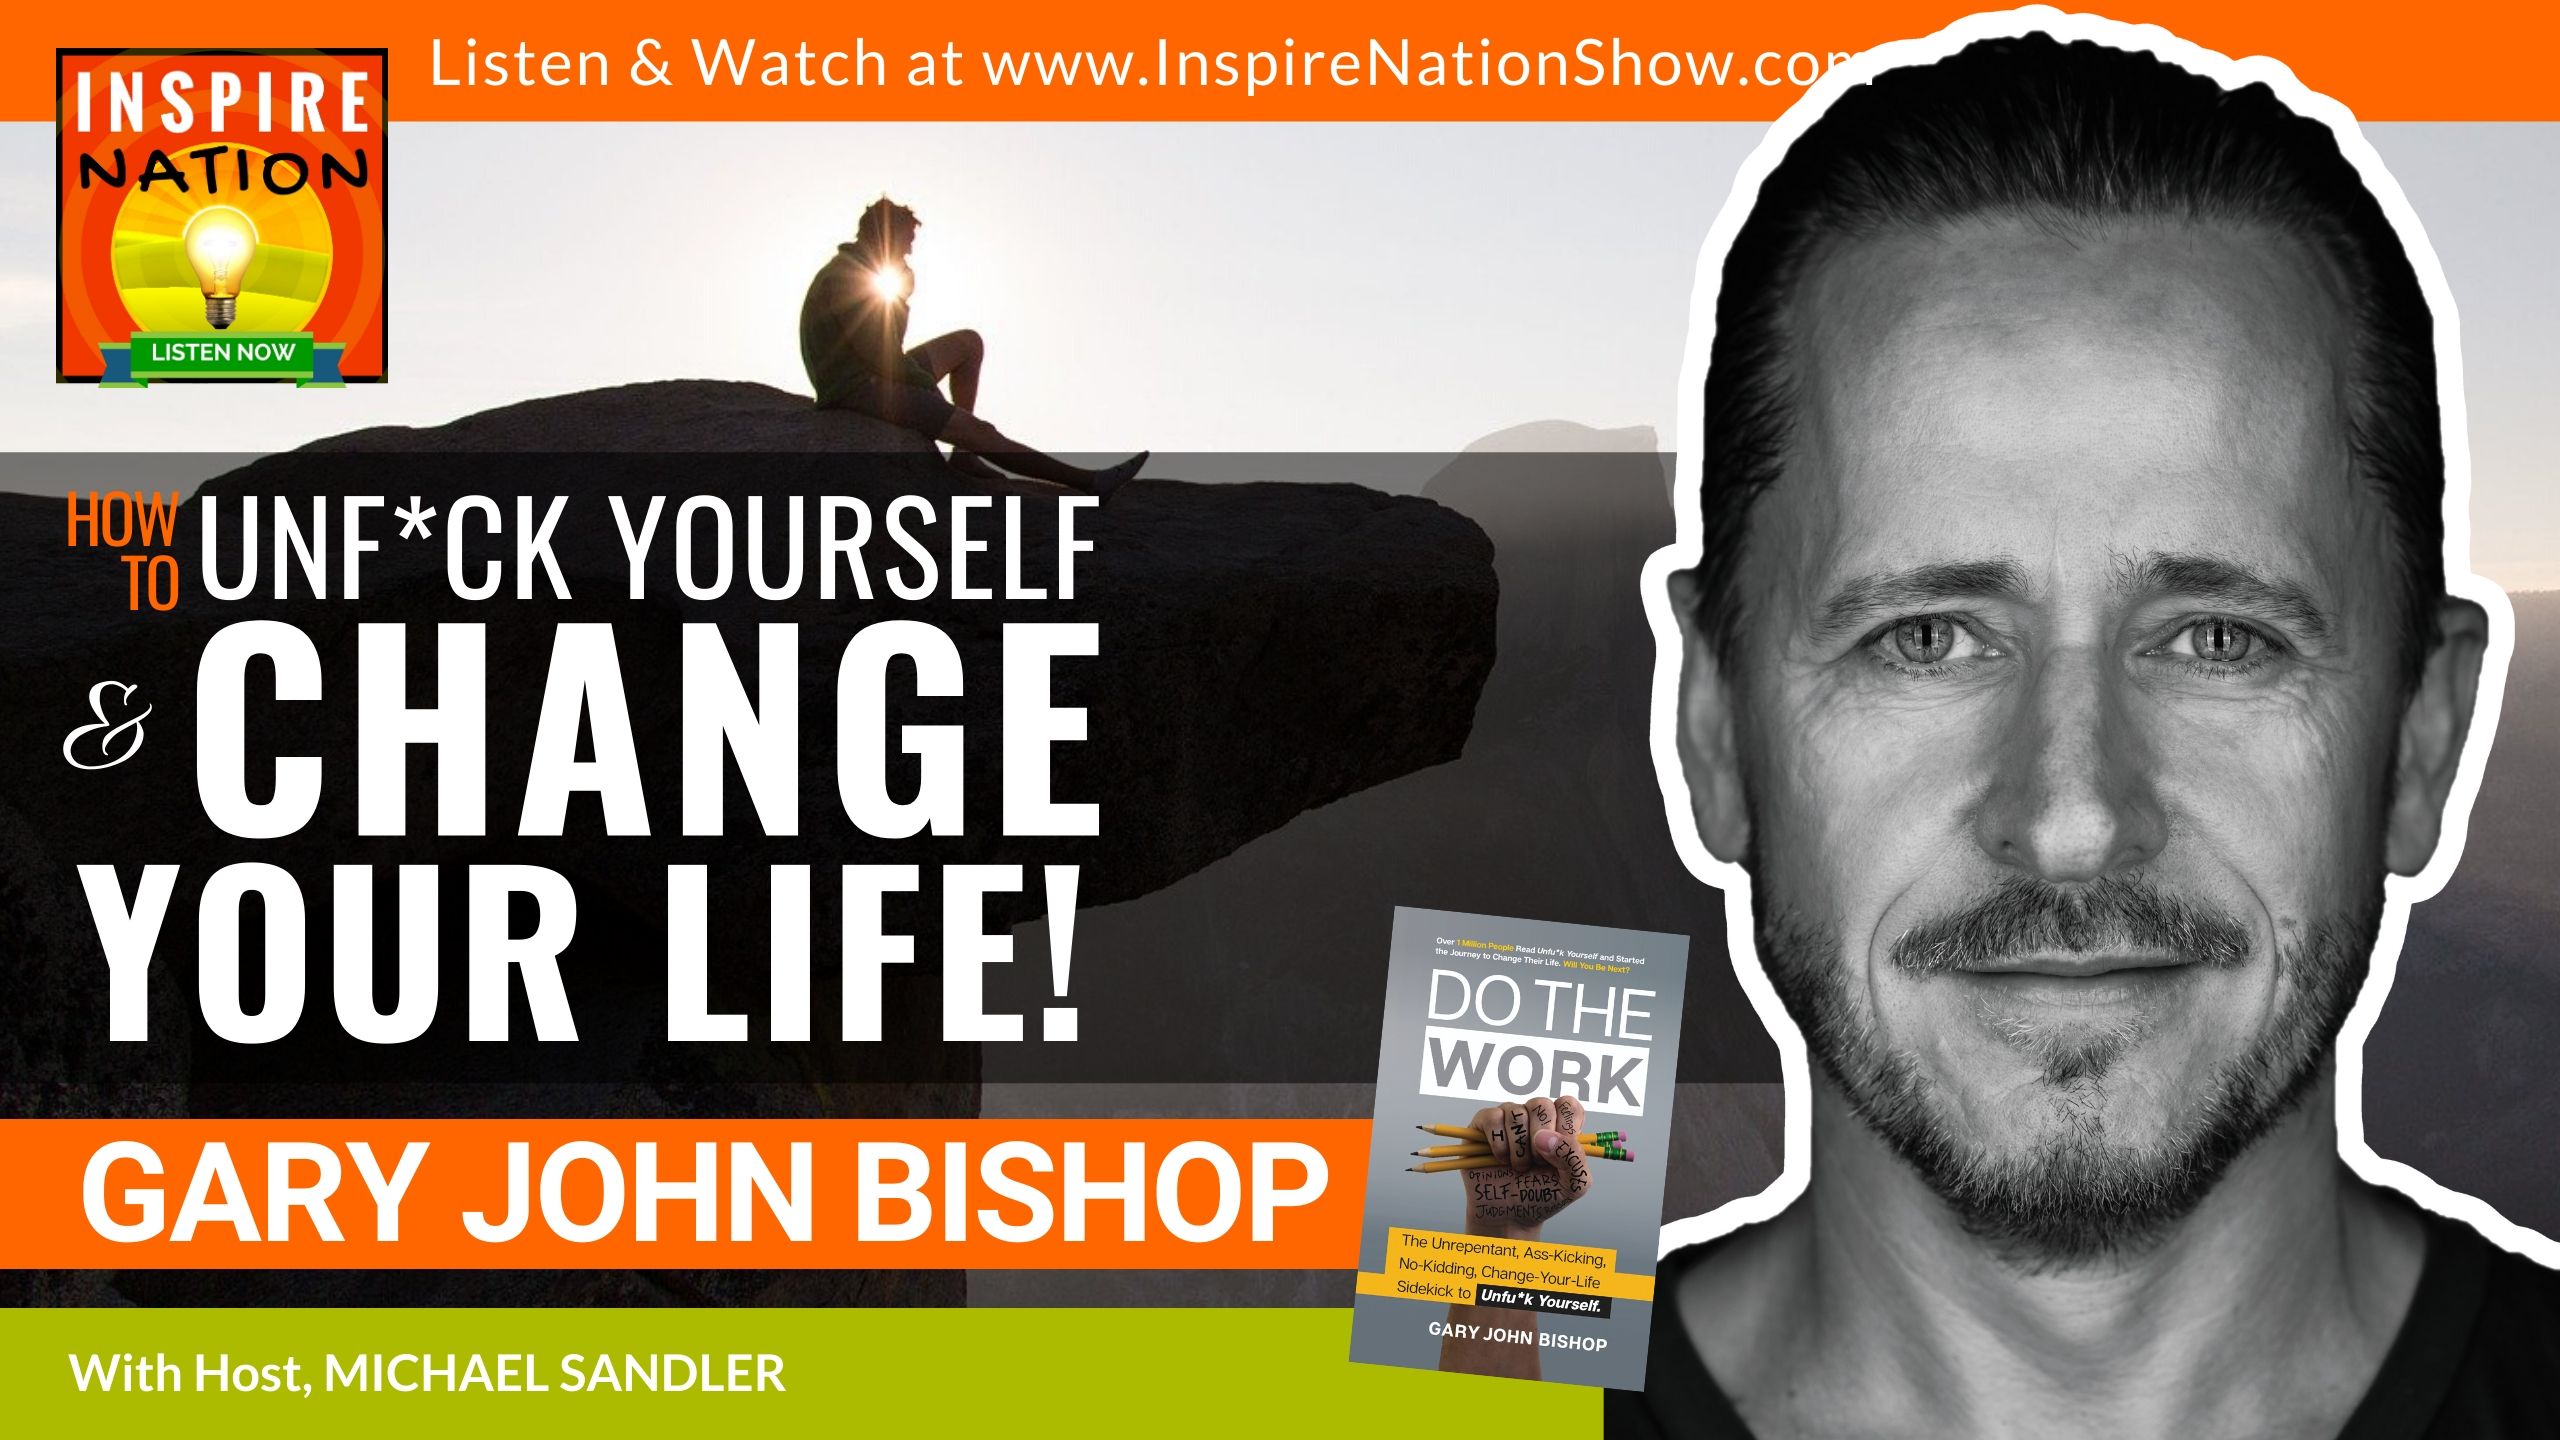 Michael Sandler interviews Gary John Bishop on how to UnF*ck Yourself by doing the work!